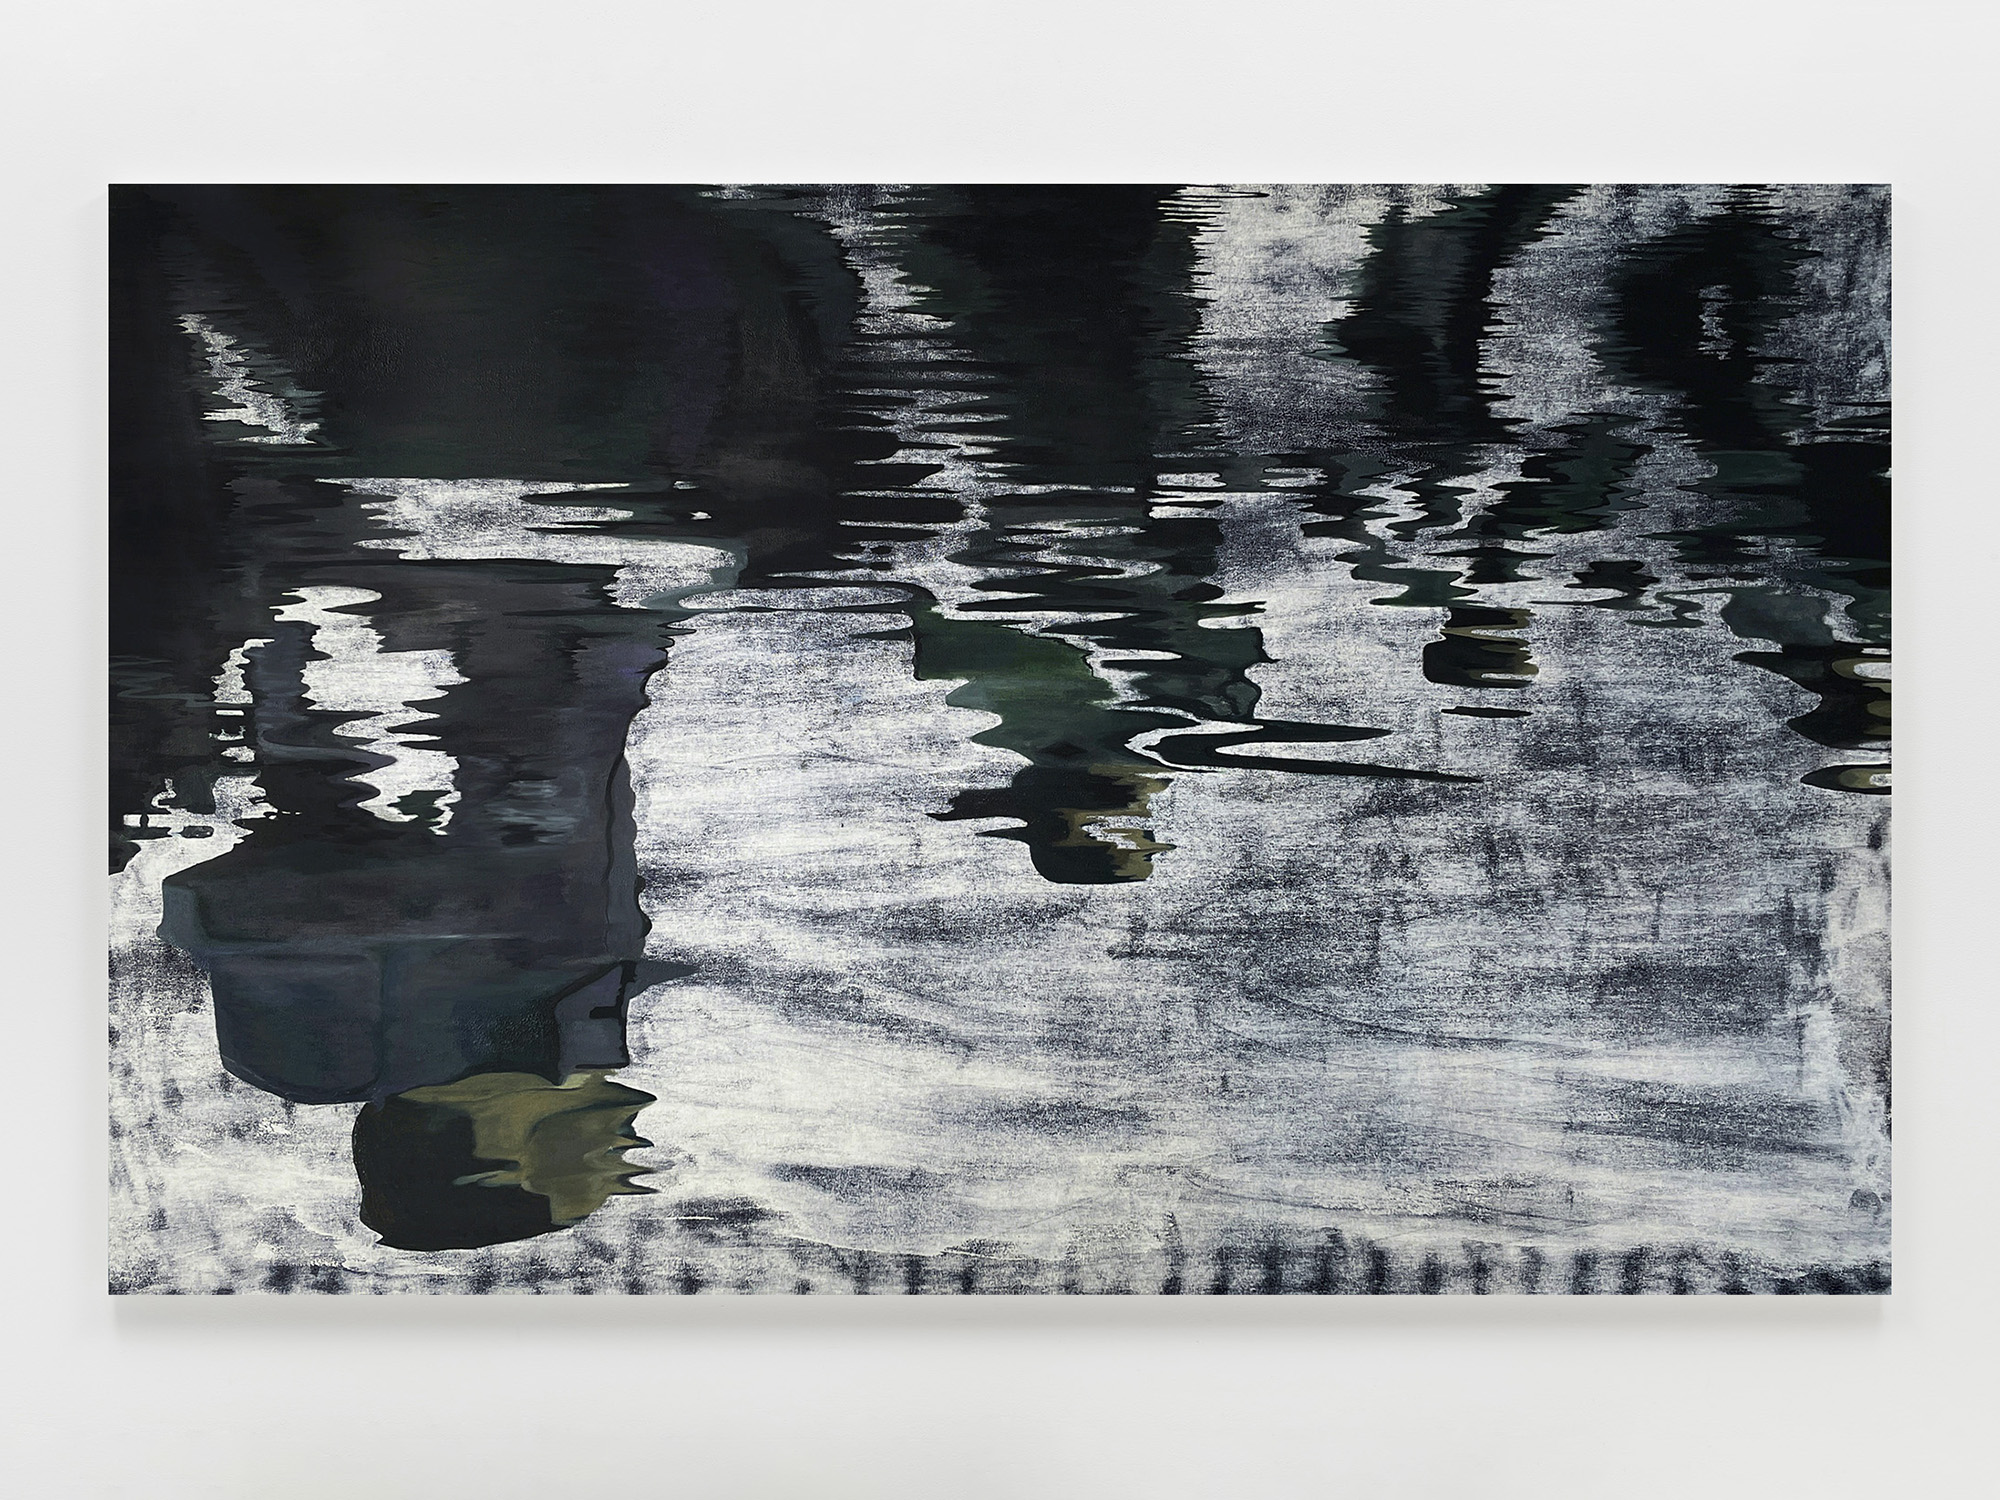 Michael and Chiyan Ho, Afloat for Another Two Seconds, 2021, oil and acrylic on canvas, 135 x 225 cm, 53 1/8 x 88 5/8 in.